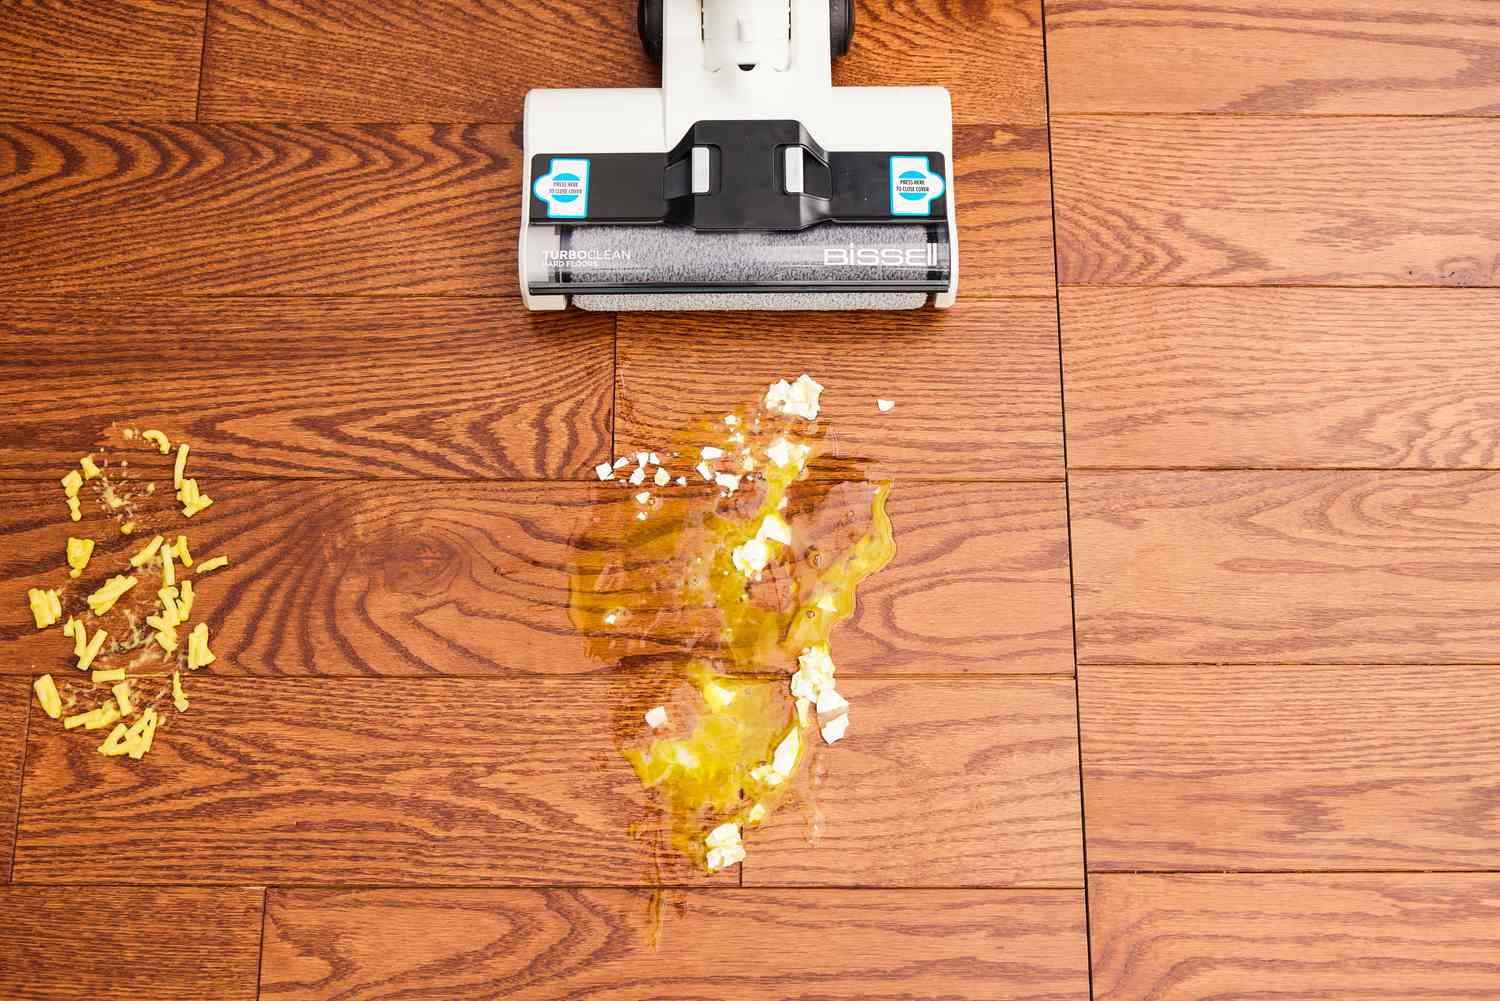 The Bissell TurboClean Cordless Hard Floor Cleaner is used to clean up a dropped egg from a wood floor